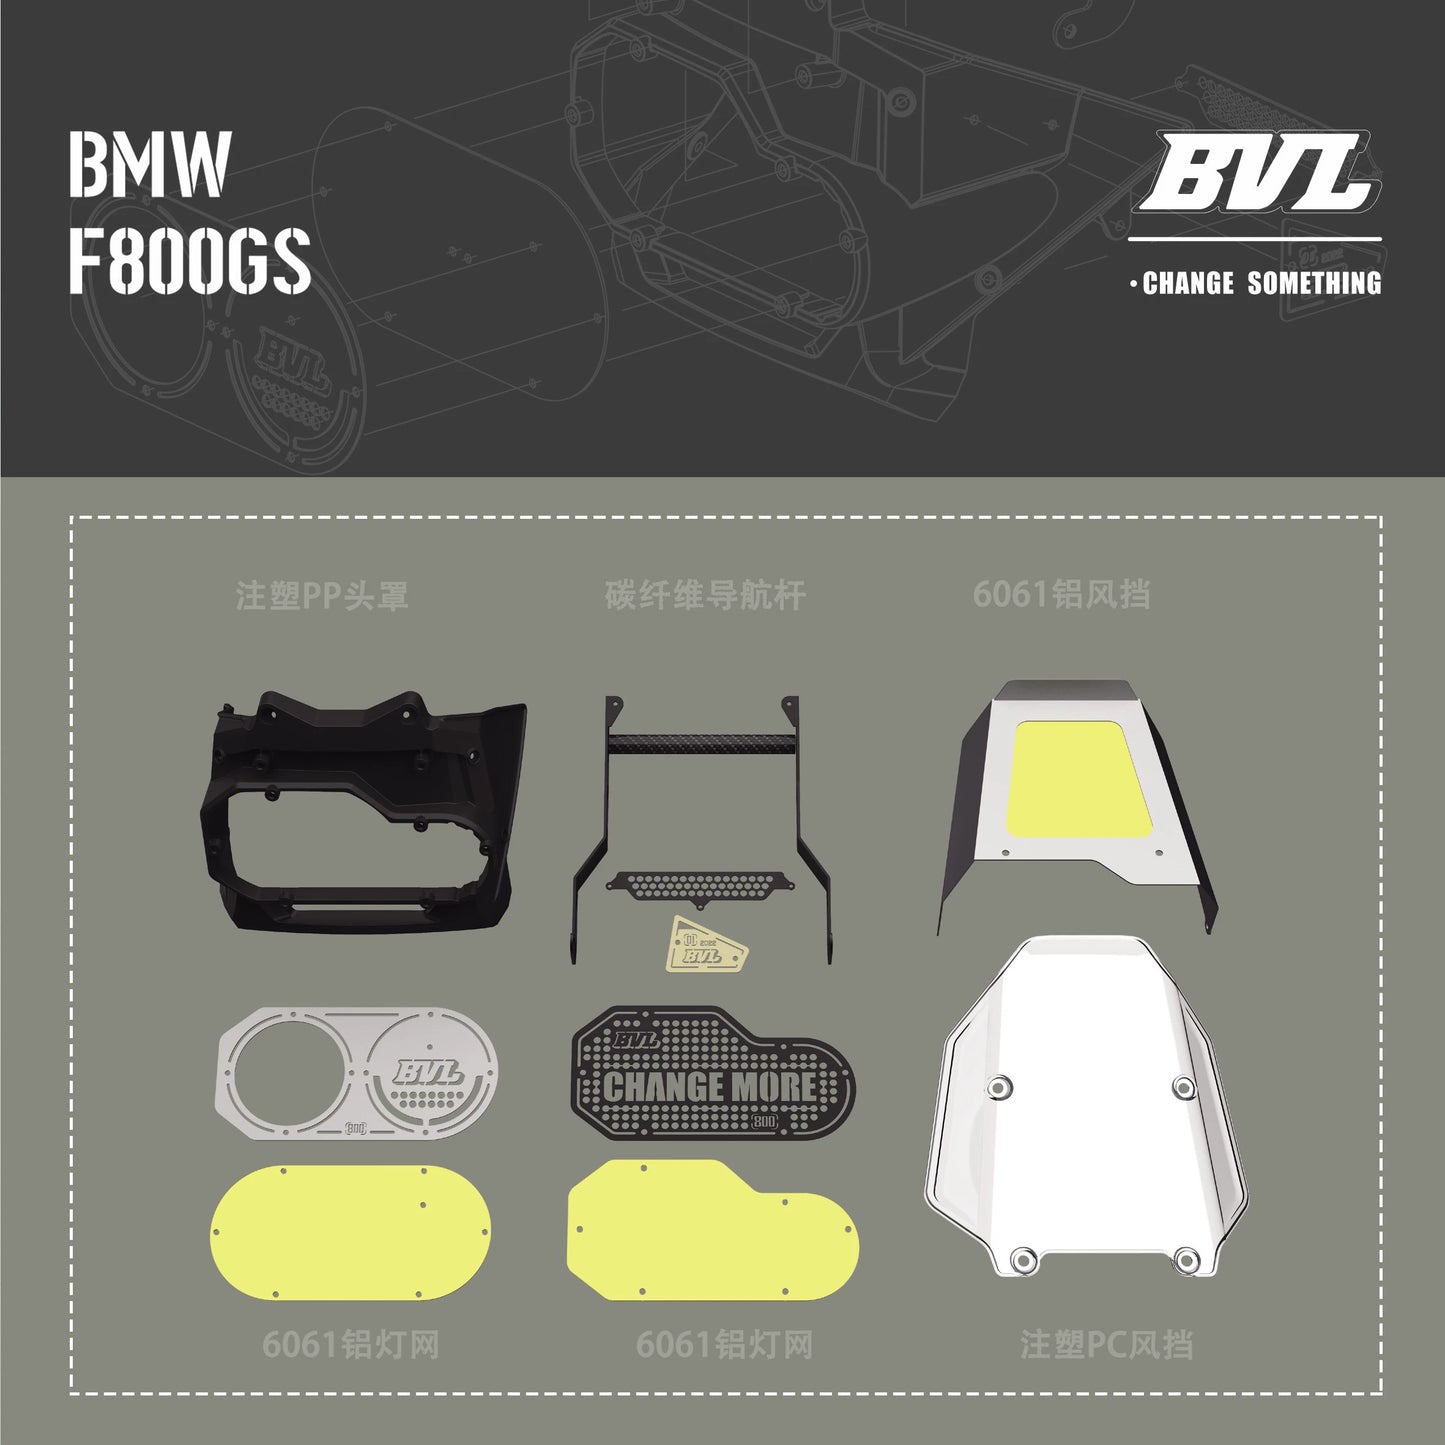 RALLY KIT For F800GS